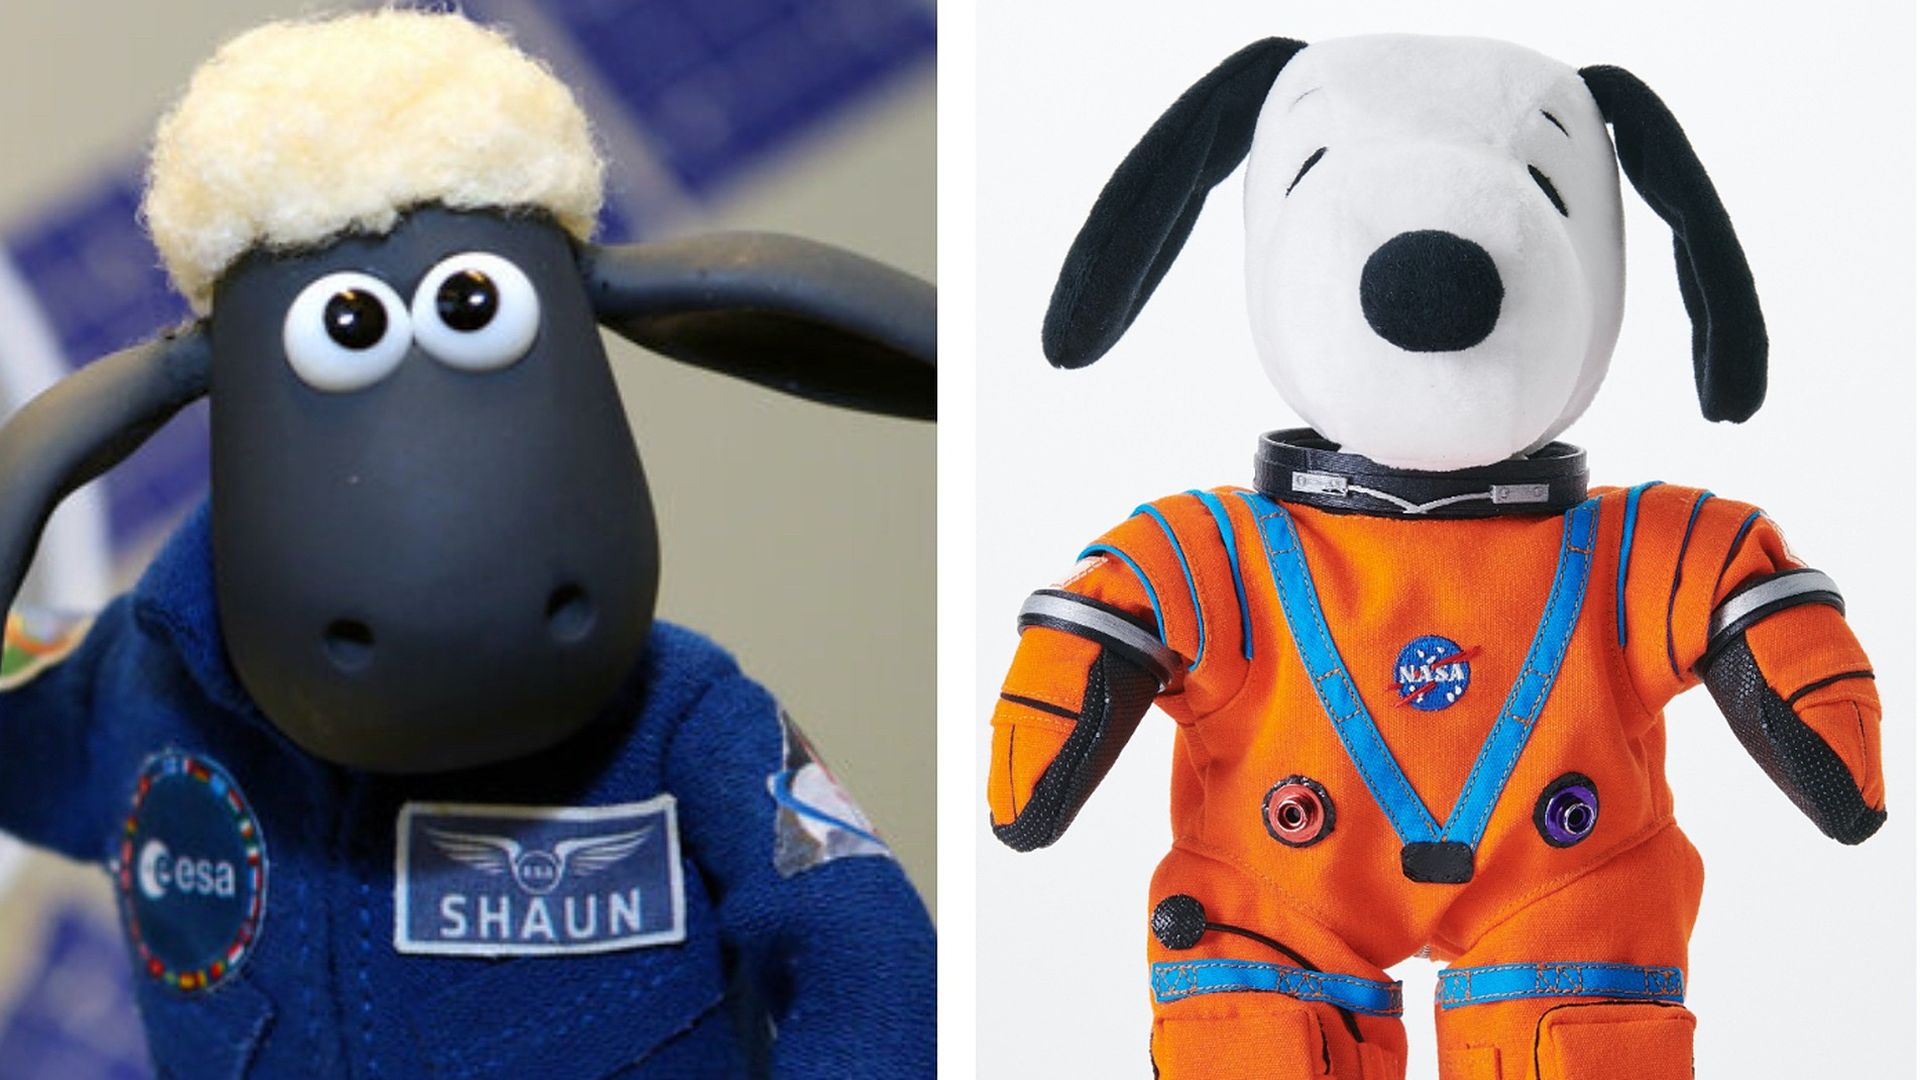 Combination images of toys of kids' characters Shaun the Sheep and Snoopy.